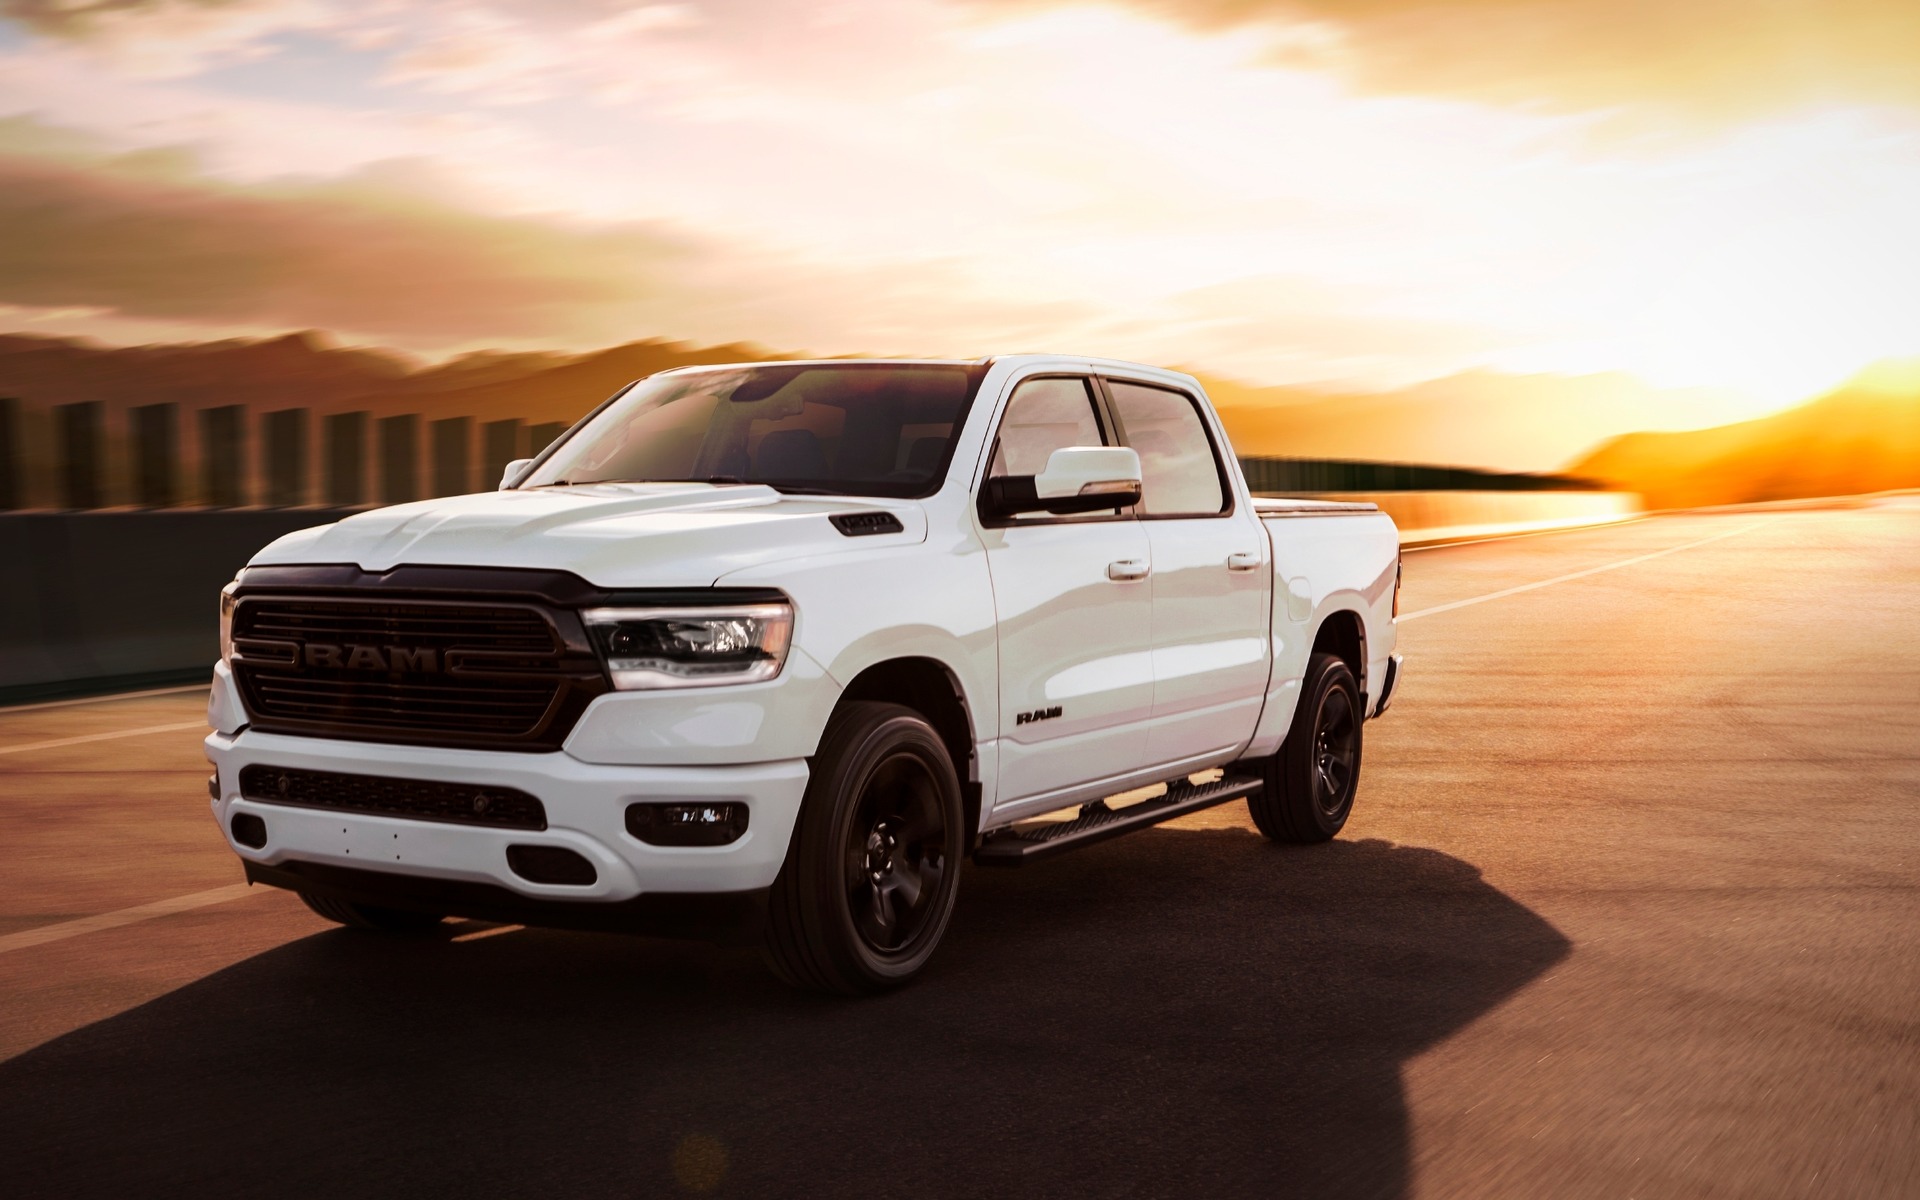 2020 Ram 1500 and Heavy Duty Get a Host of Updates - The Car Guide